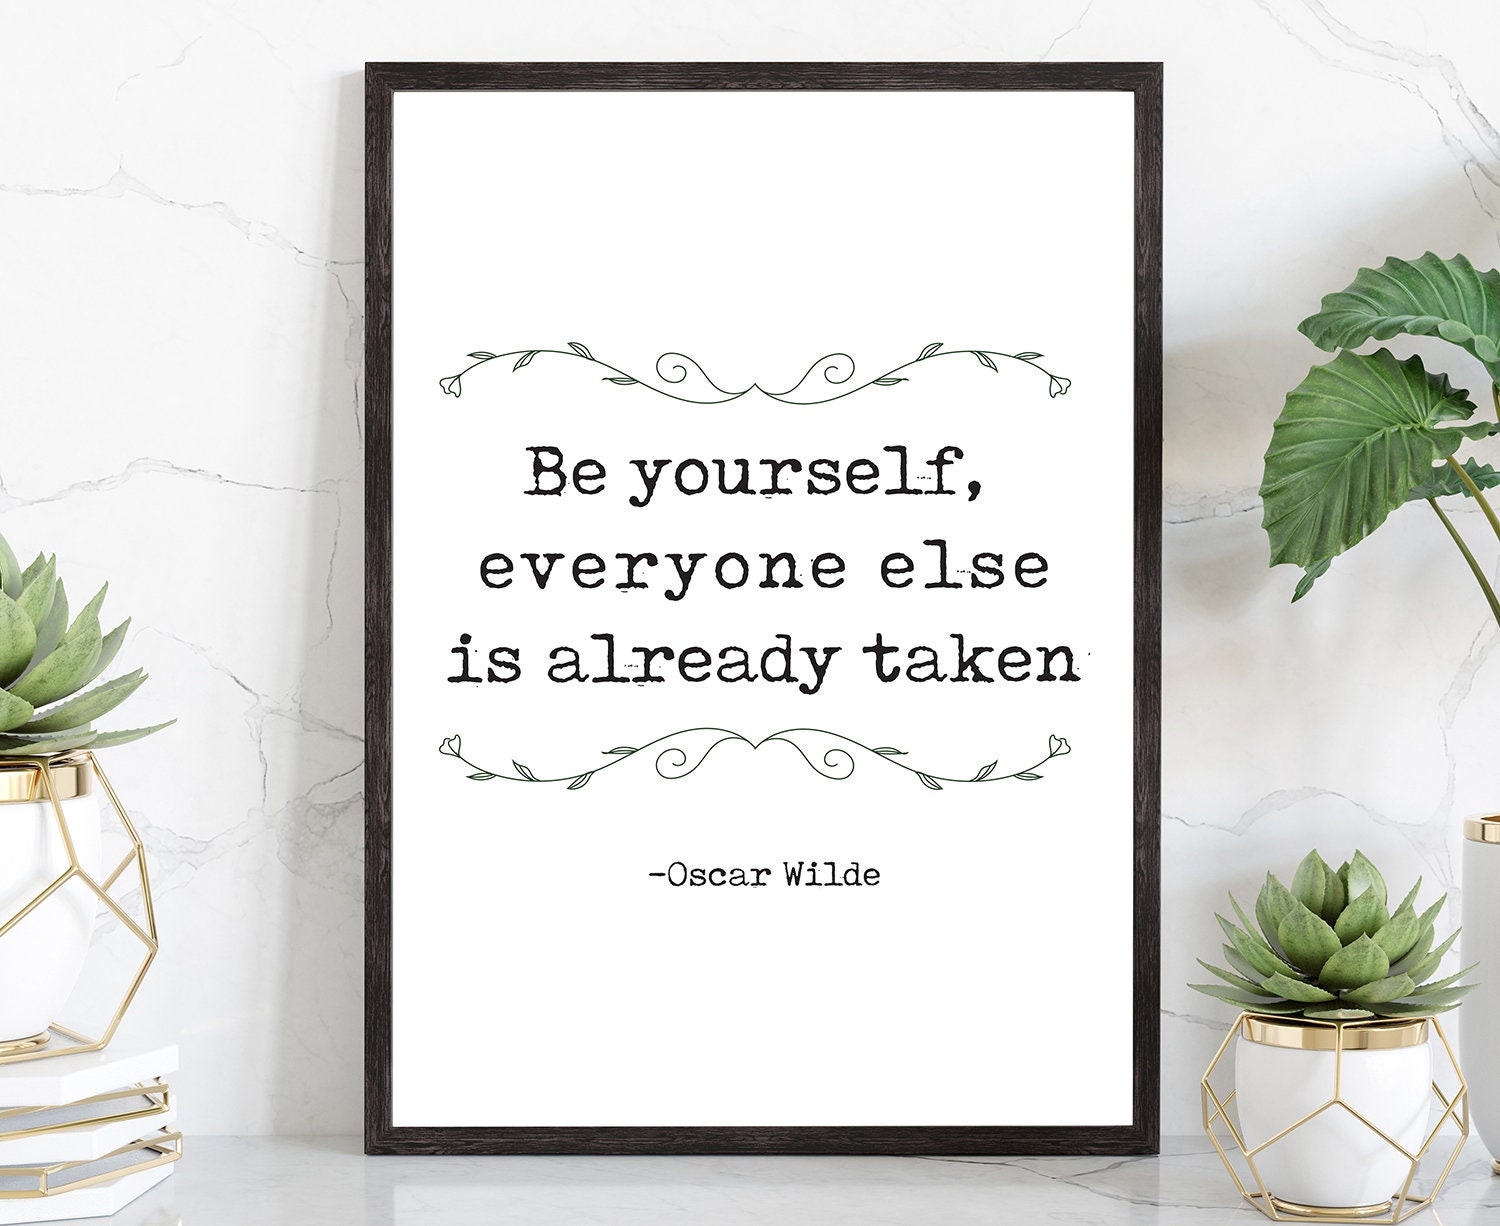 Be Yourself Everyone.., Oscar Wilde quote poster print, Home wall decor, Motivational quotes, Poster prints, Kids wall decoration, Home gift